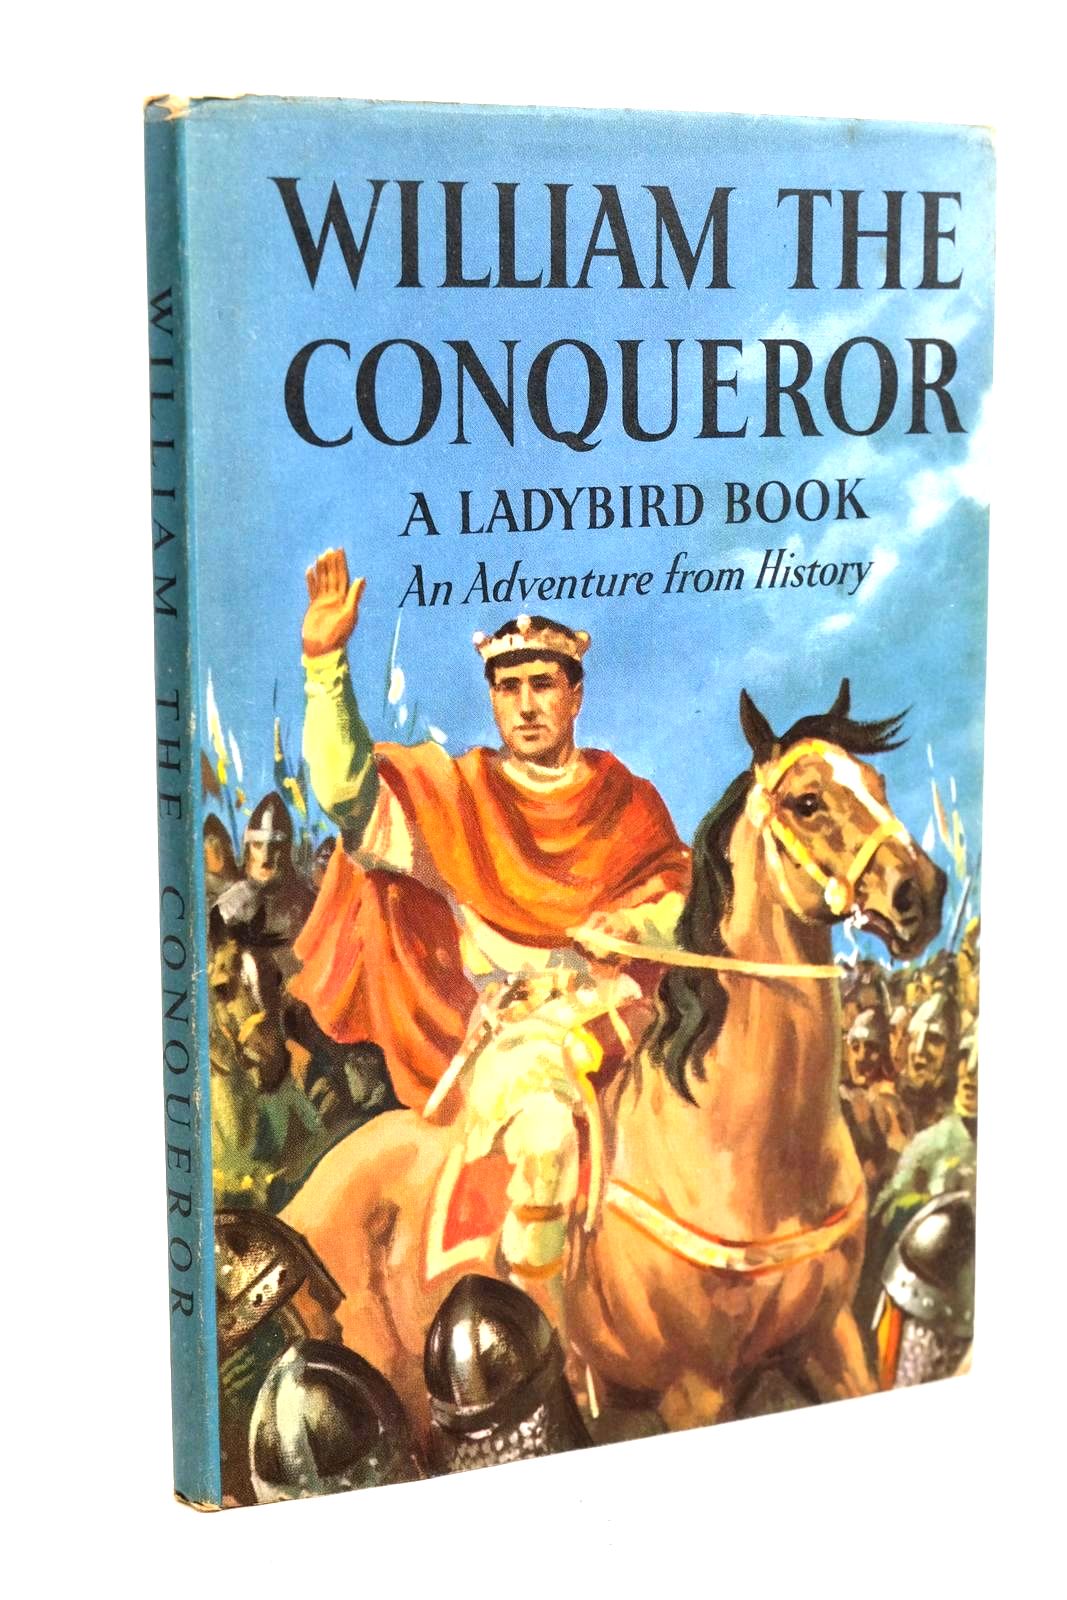 Photo of WILLIAM THE CONQUEROR written by Peach, L. Du Garde illustrated by Kenney, John published by Wills &amp; Hepworth Ltd. (STOCK CODE: 1320622)  for sale by Stella & Rose's Books